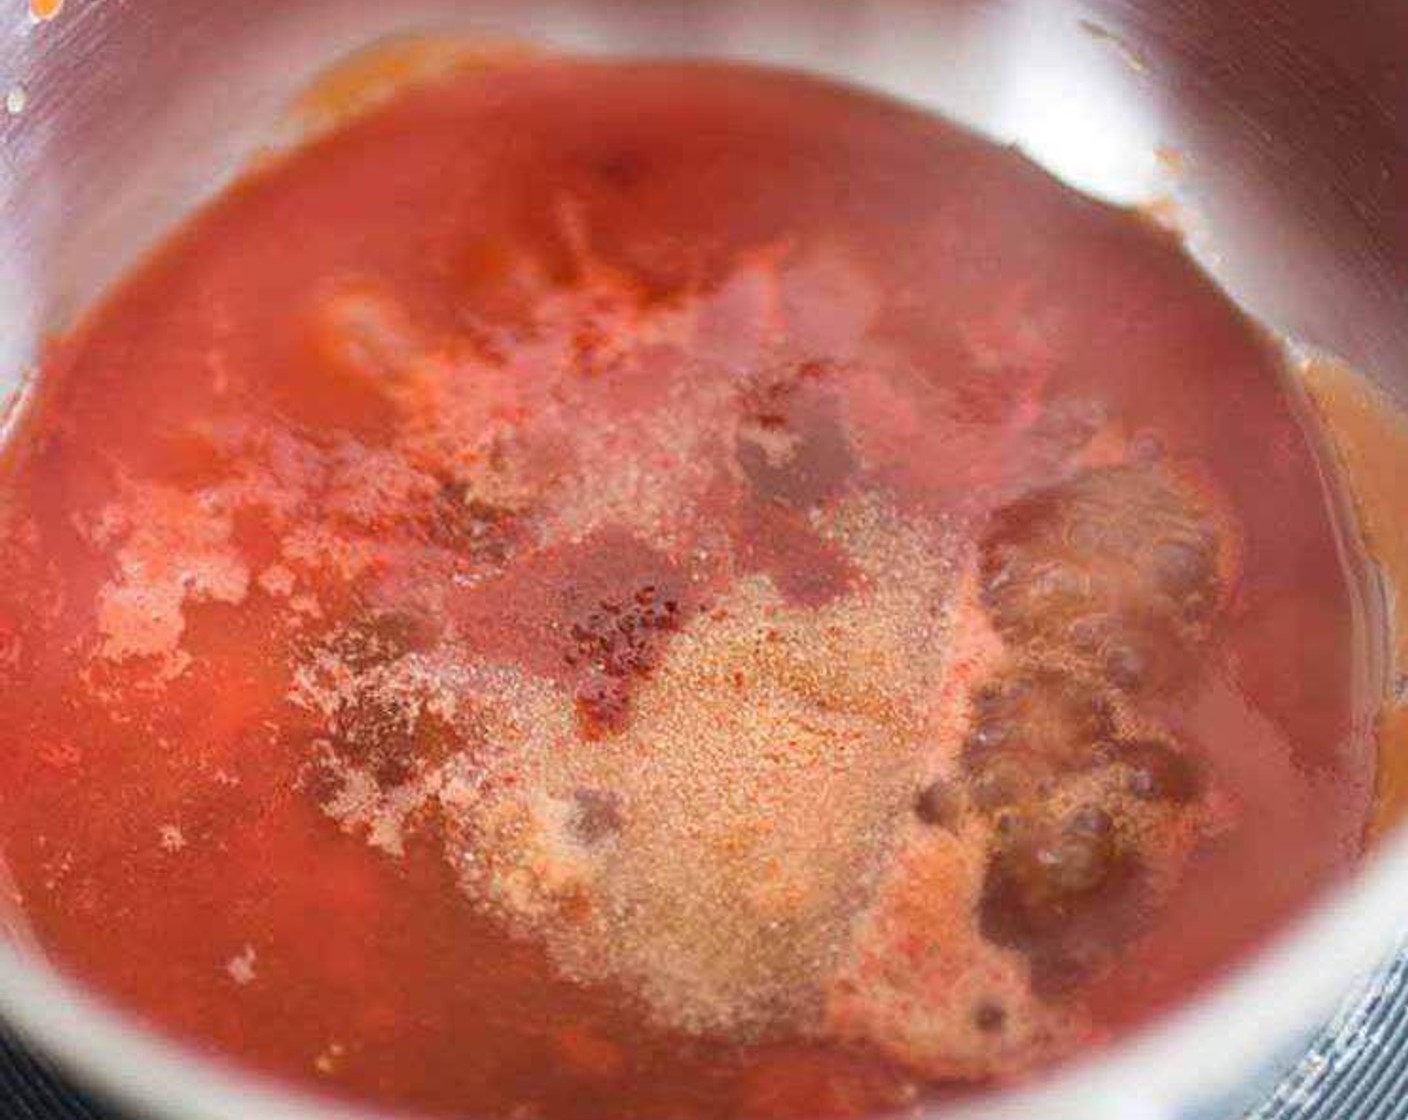 step 2 Reduce to low heat, pour over the Tomato Passata (3/4 cup) and add the Light Soy Sauce (2 Tbsp), Maple Syrup (2 Tbsp), Apple Cider Vinegar (1/2 Tbsp),  Smoked Paprika (1 tsp), Onion Powder (1 tsp), Yellow Mustard (1/2 tsp), and Salt (1/4 tsp). Cook for 5 minutes, stirring regularly to allow the flavors to blend.